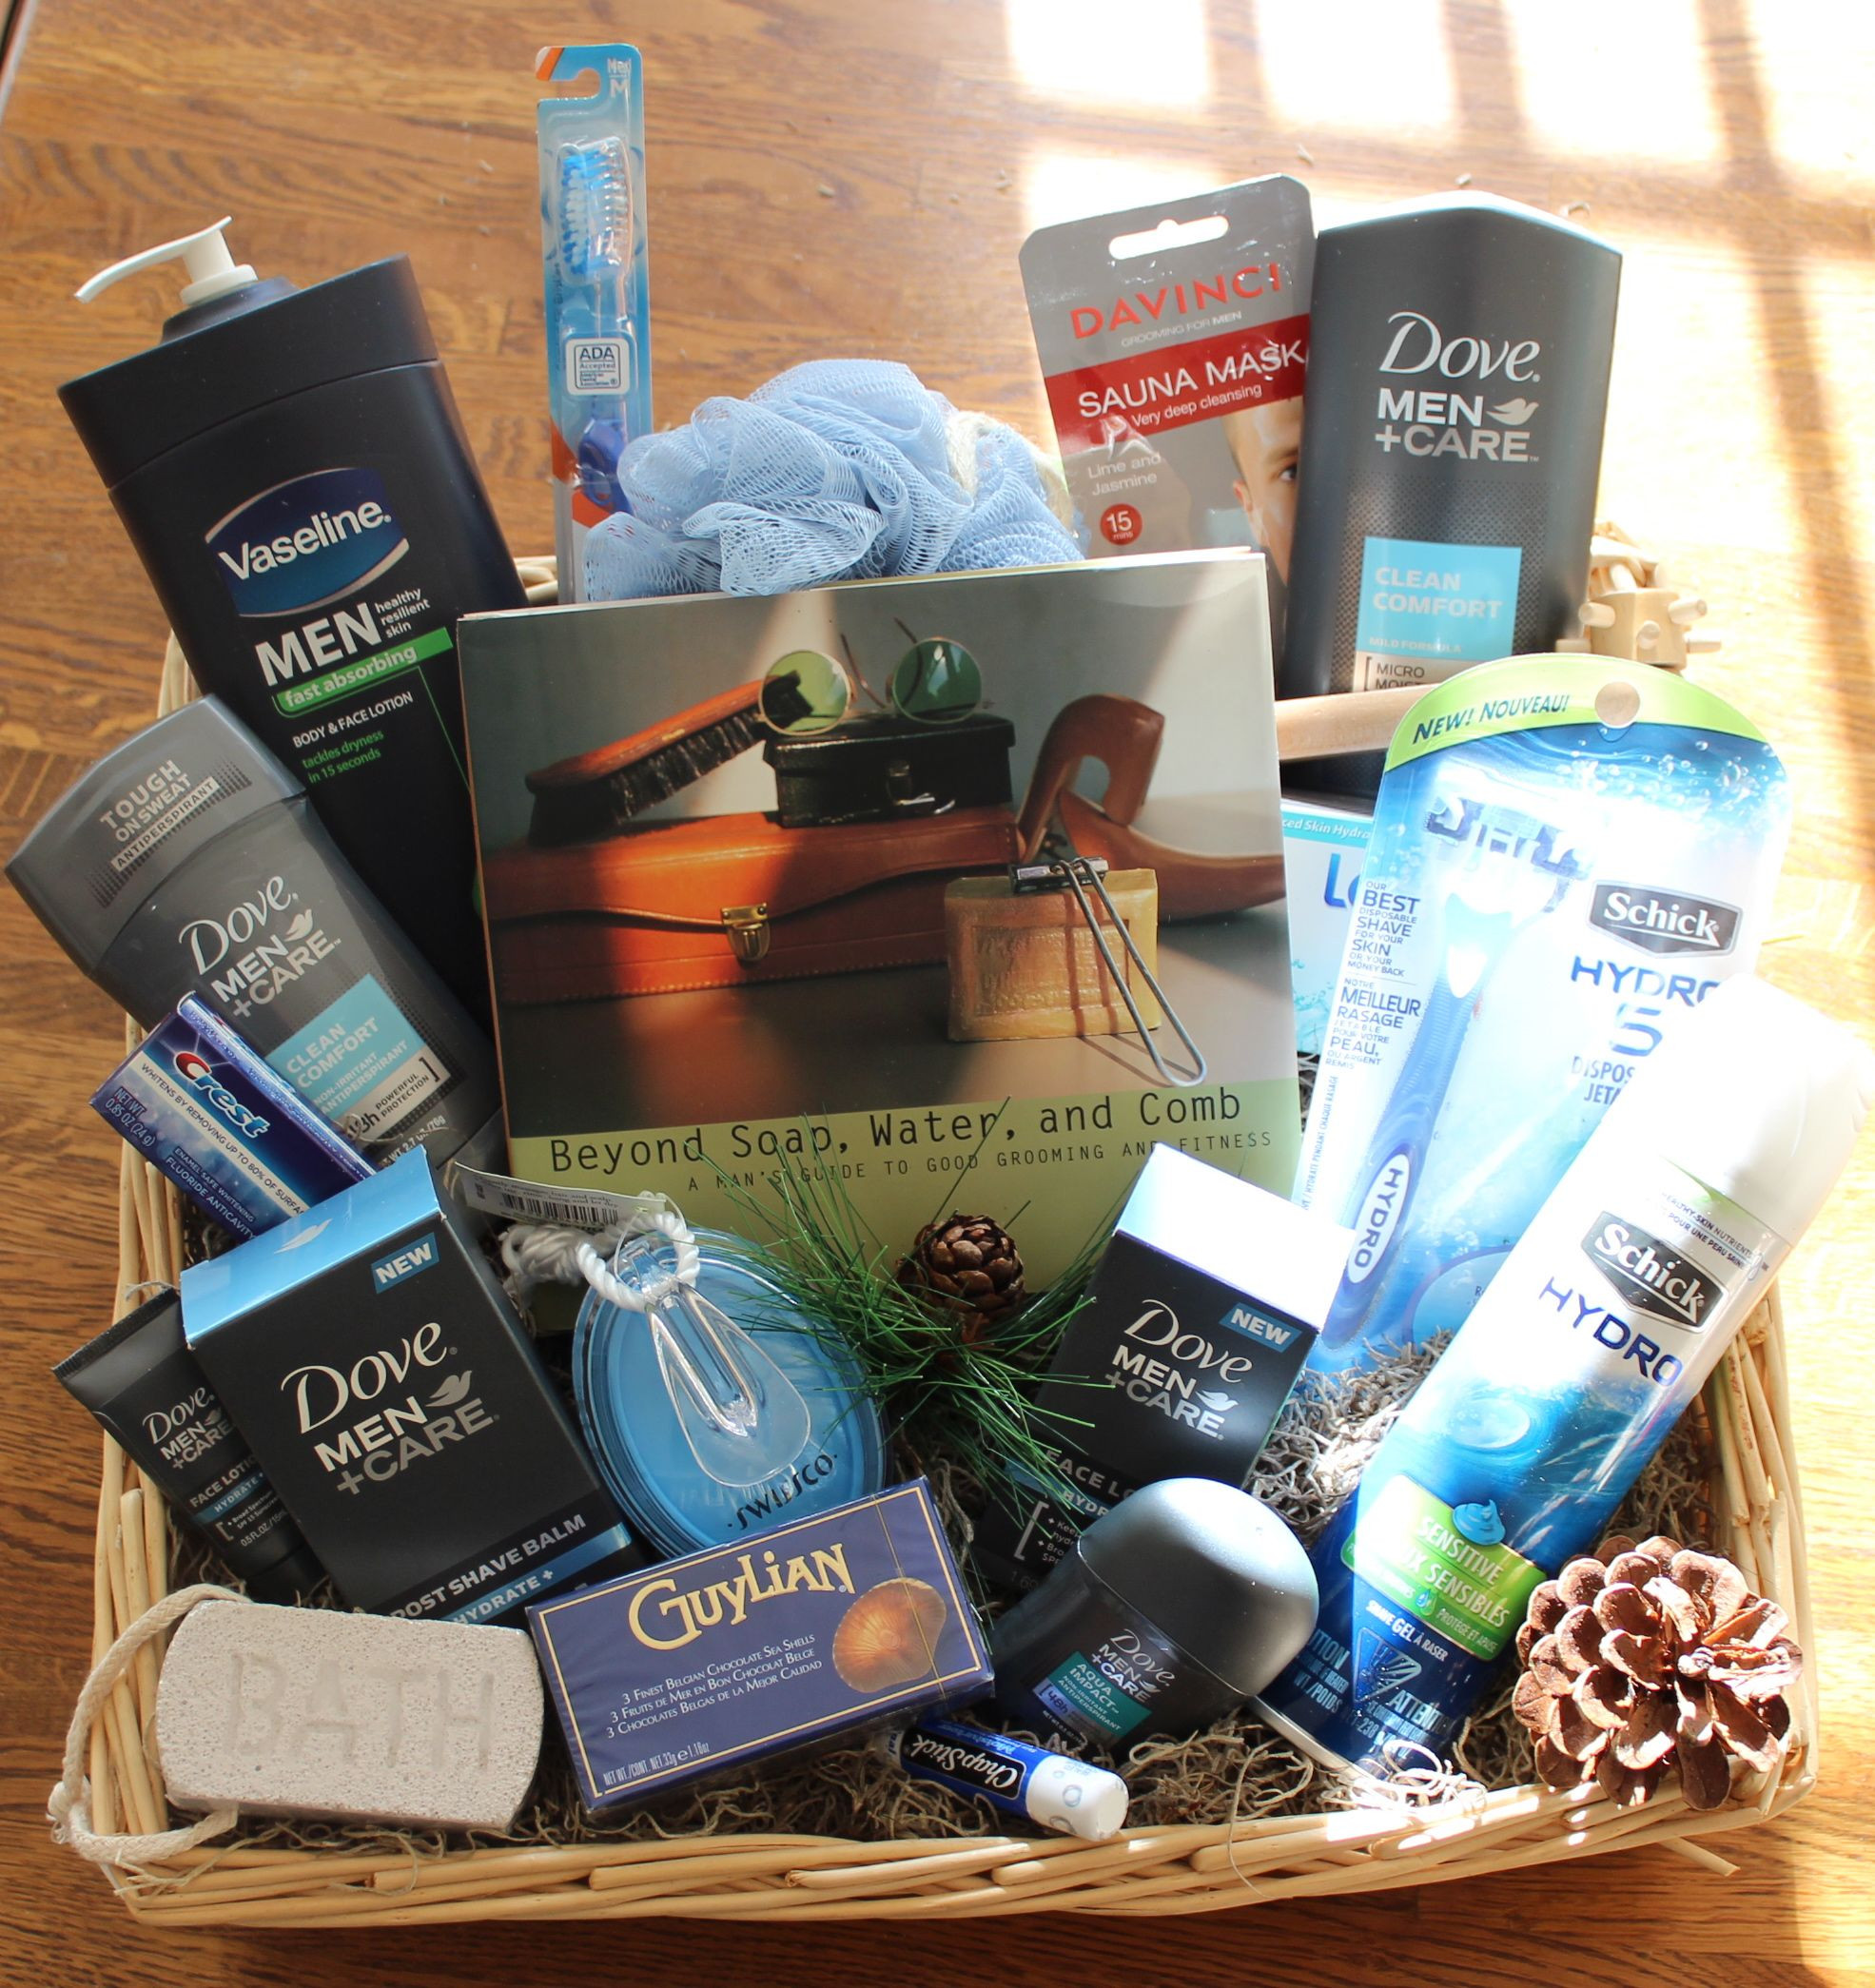 Father Day Gift Ideas For Boyfriend
 Men s grooming spa Fathers Day basket before cellophane